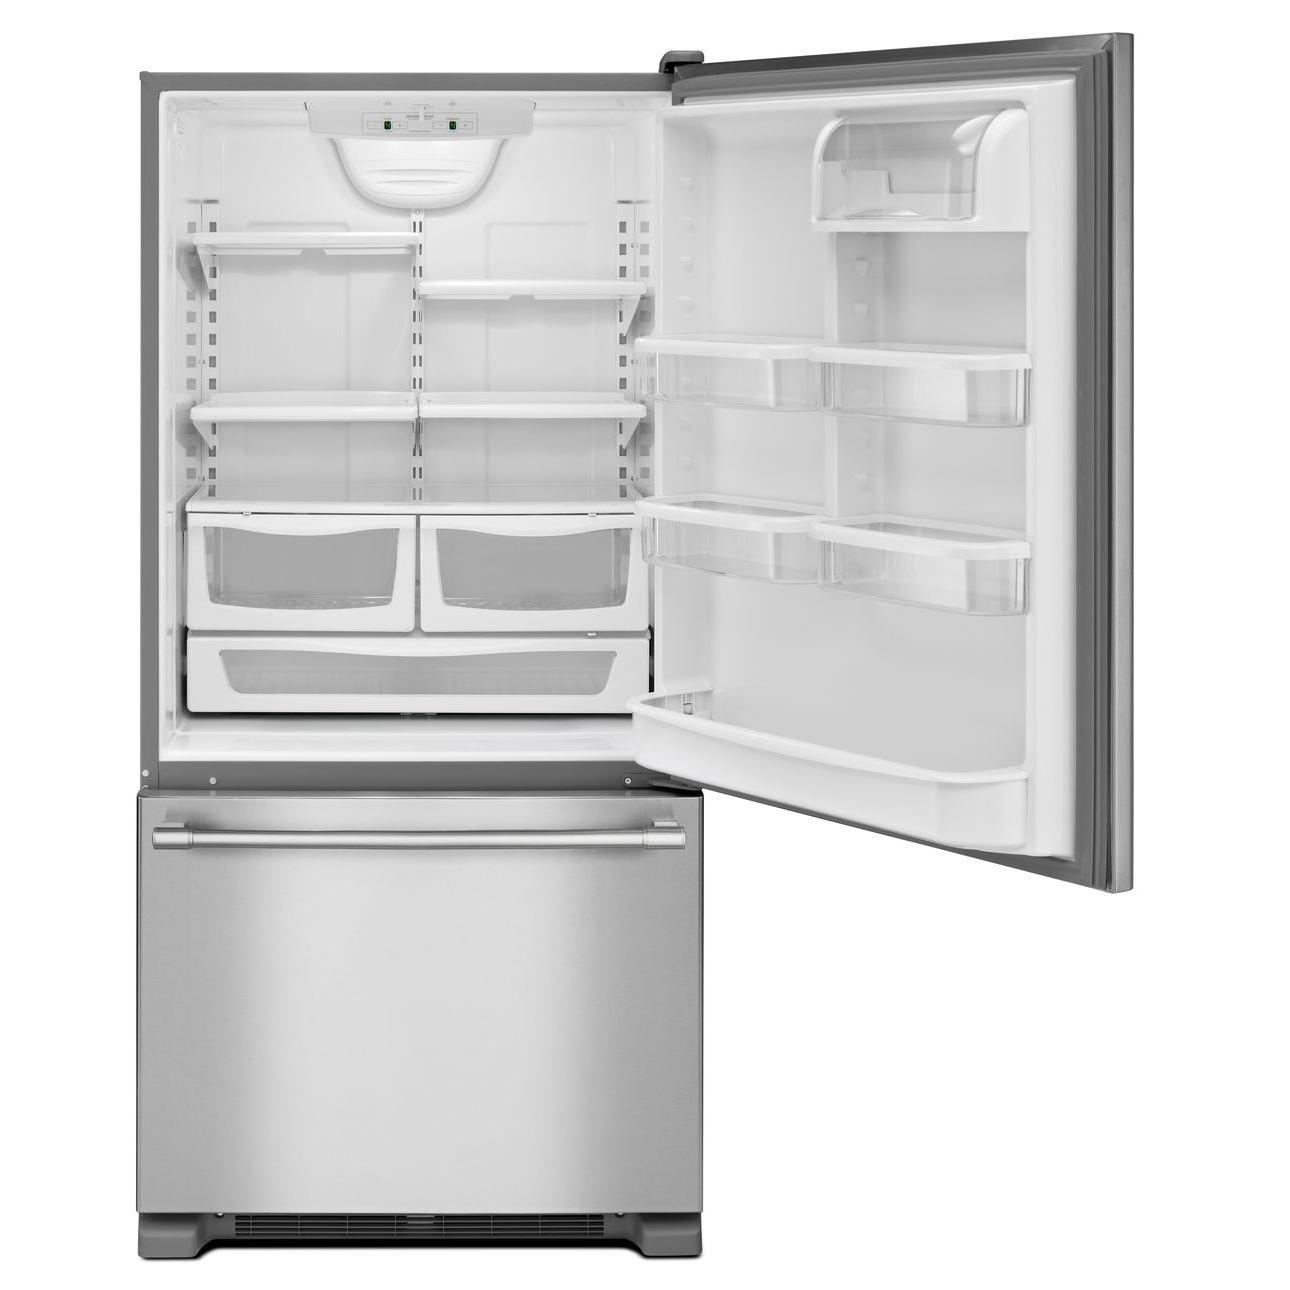 Maytag 33-inch, 22.1 cu. ft. Bottom Freezer Refrigerator with Ice and Water MBF2258FEZ